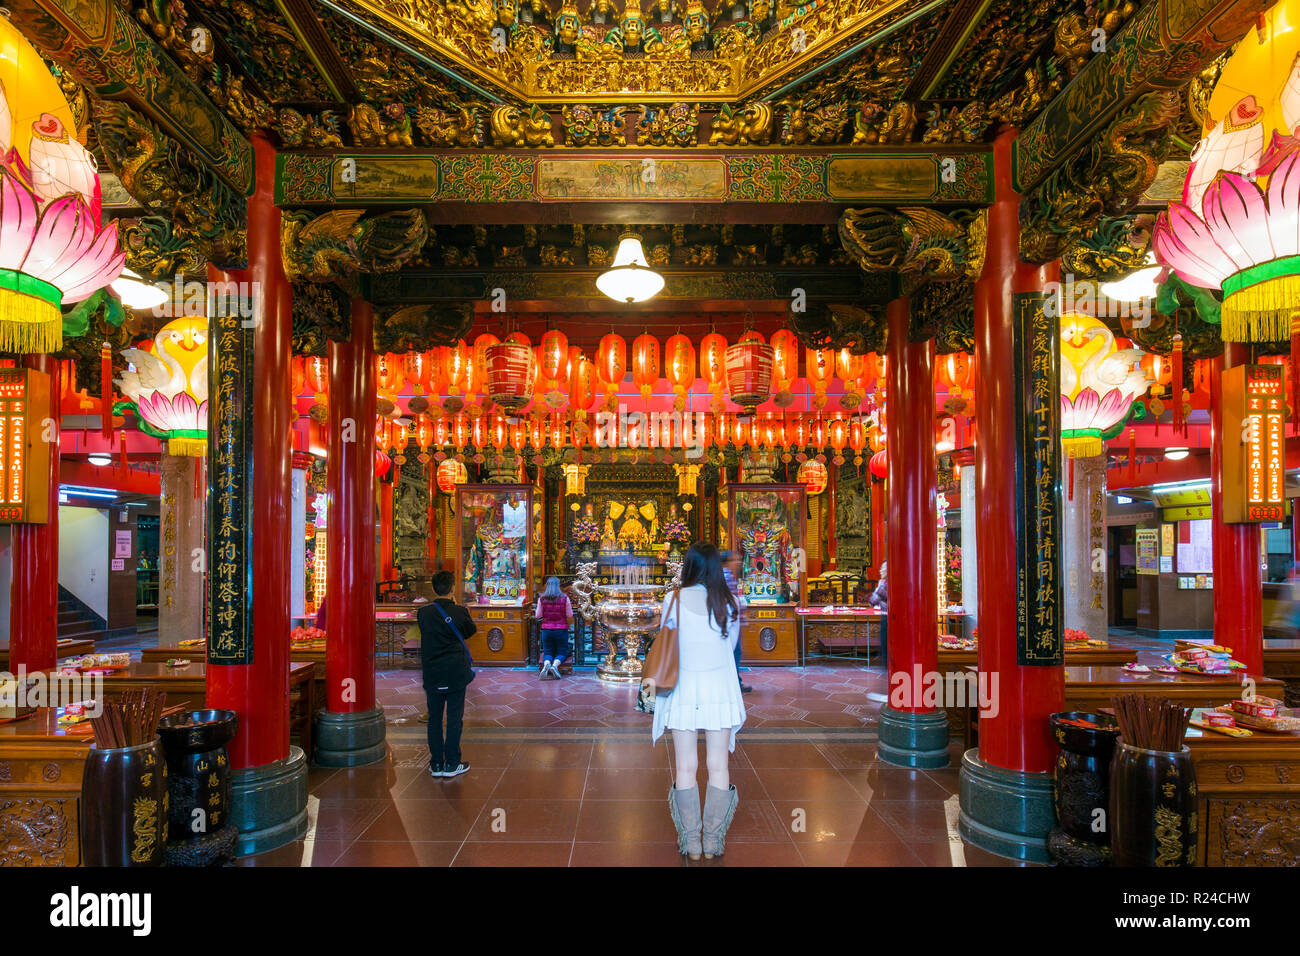 Temple Ciyou, Songshan District, Taipei, Taiwan, l'Asie Banque D'Images